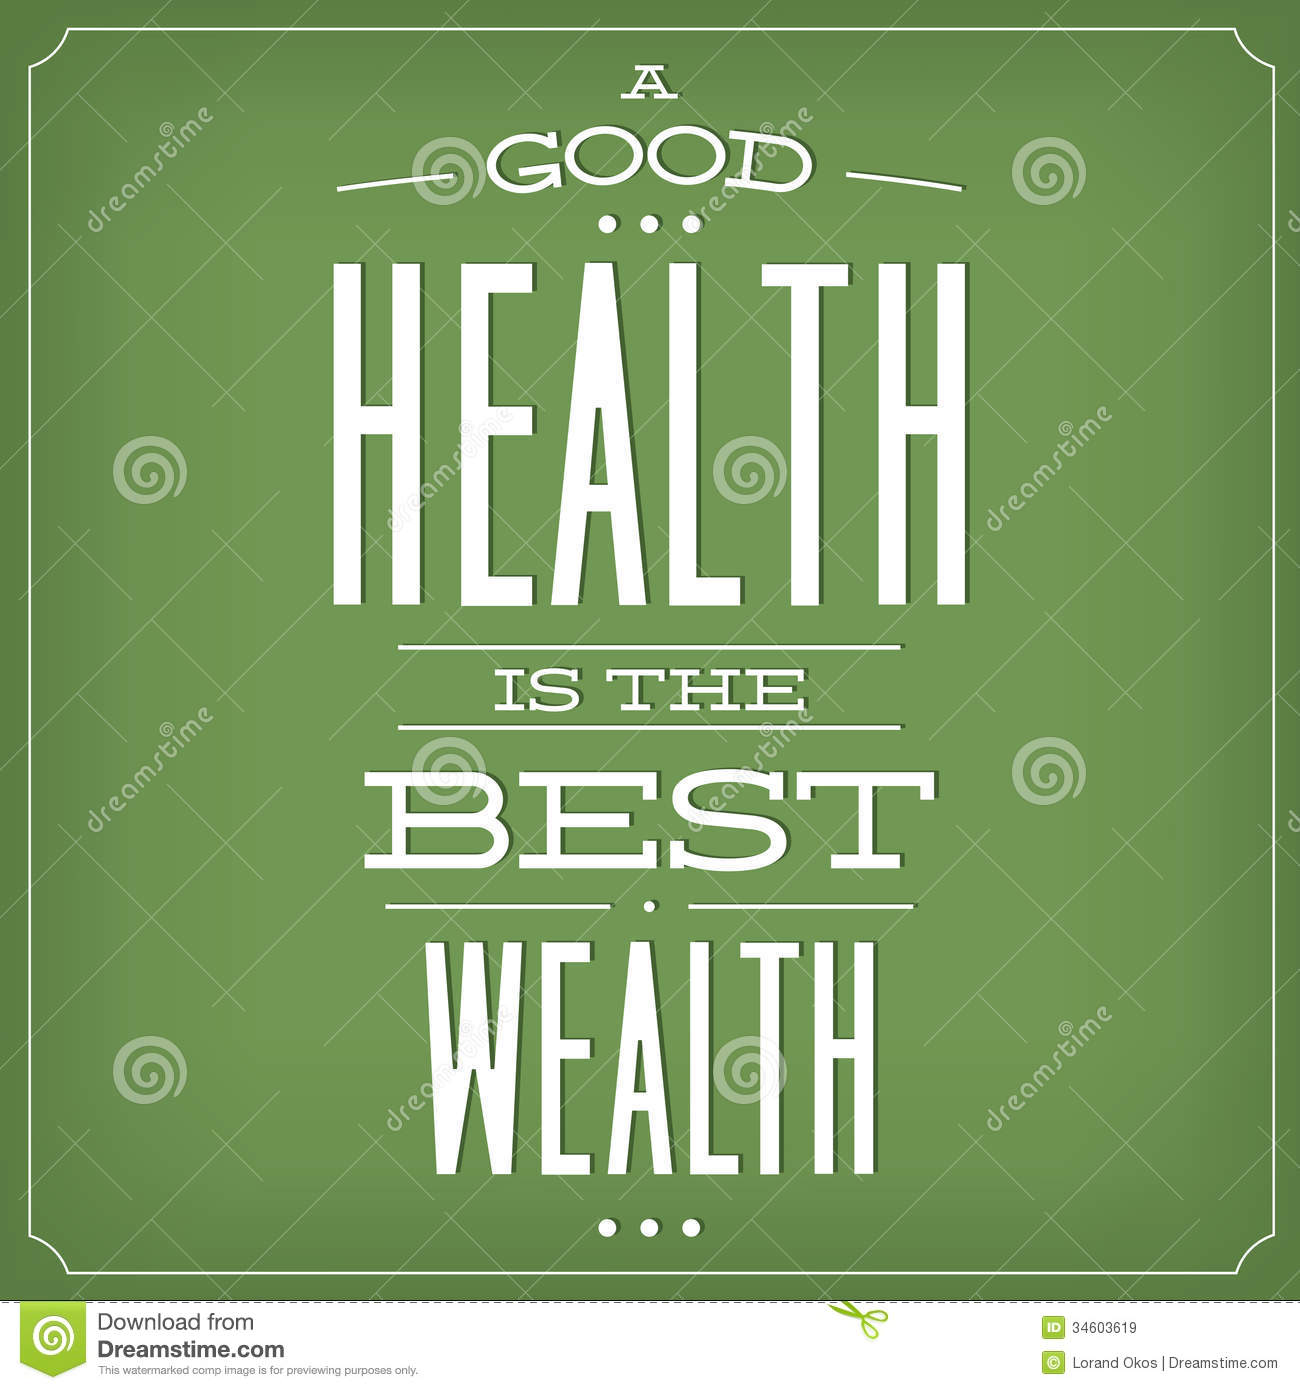 Health is the best wealth